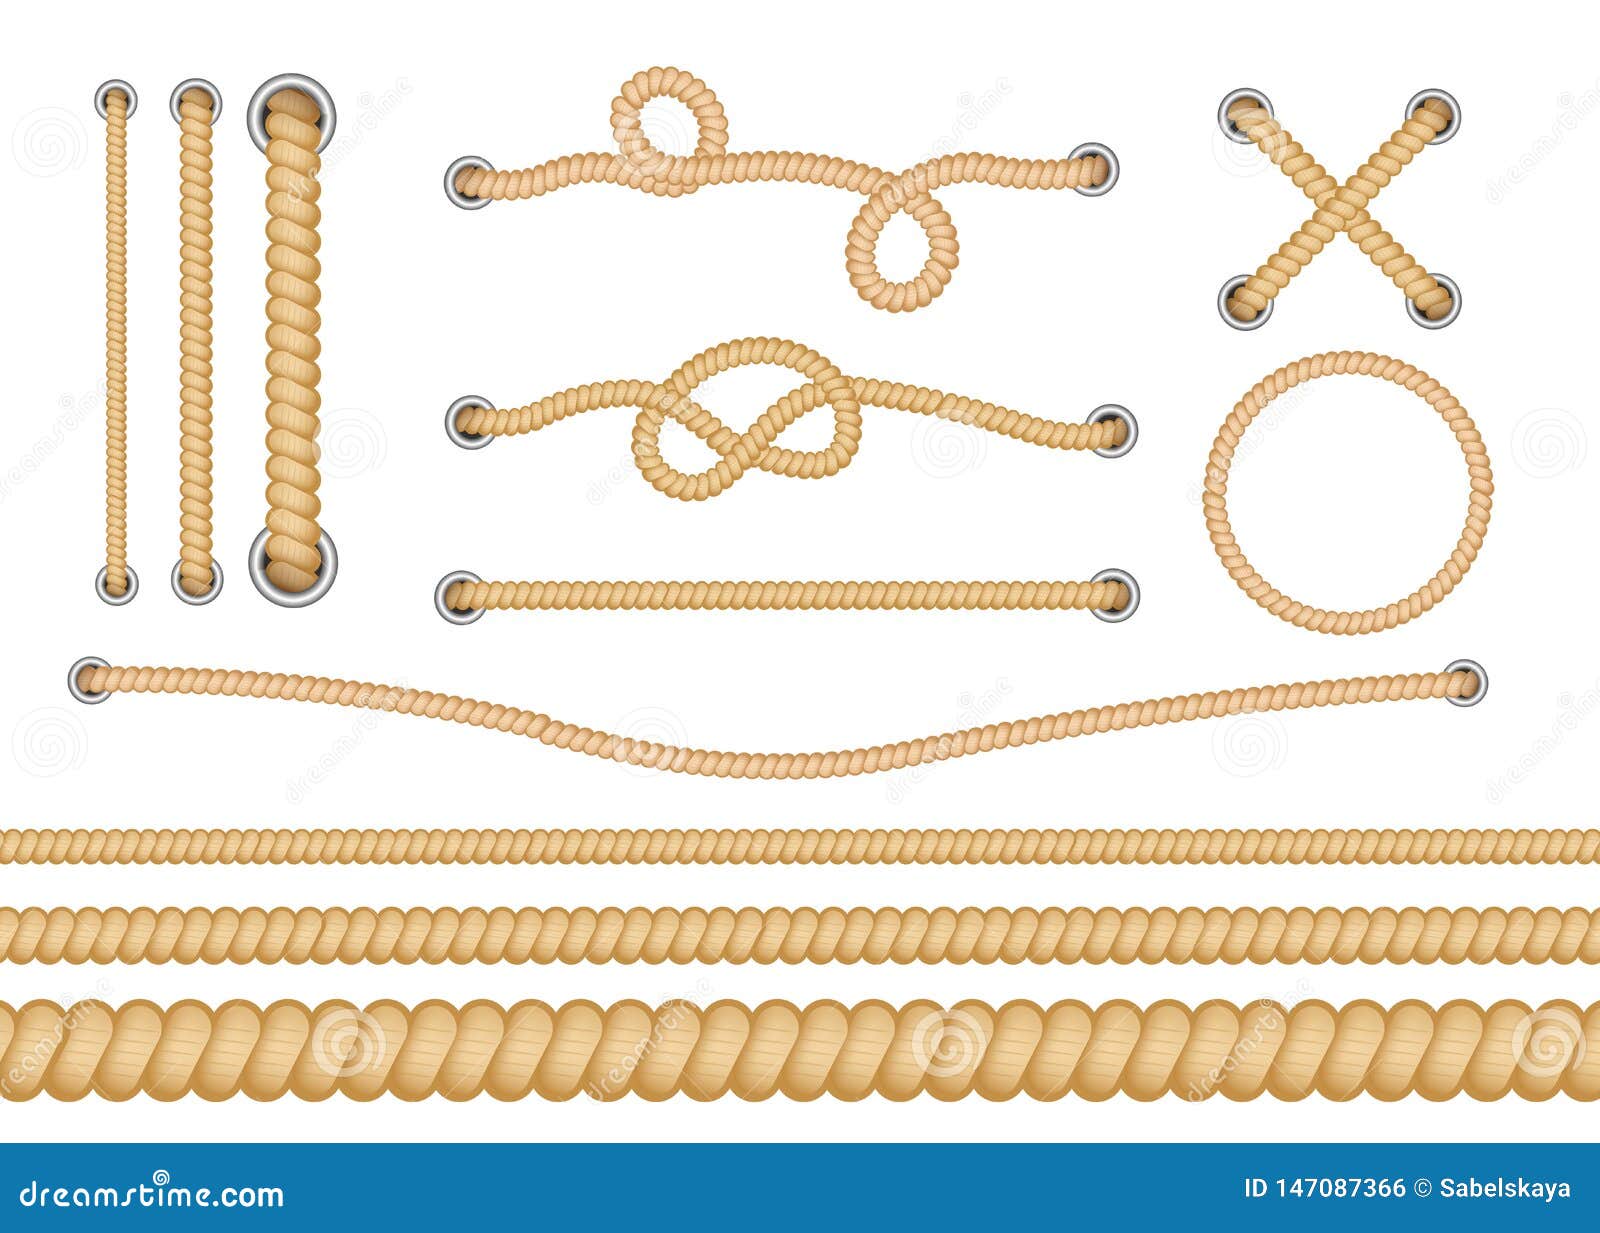 Set of Various Types of Nautical Loops and Knots for Rope. Stock